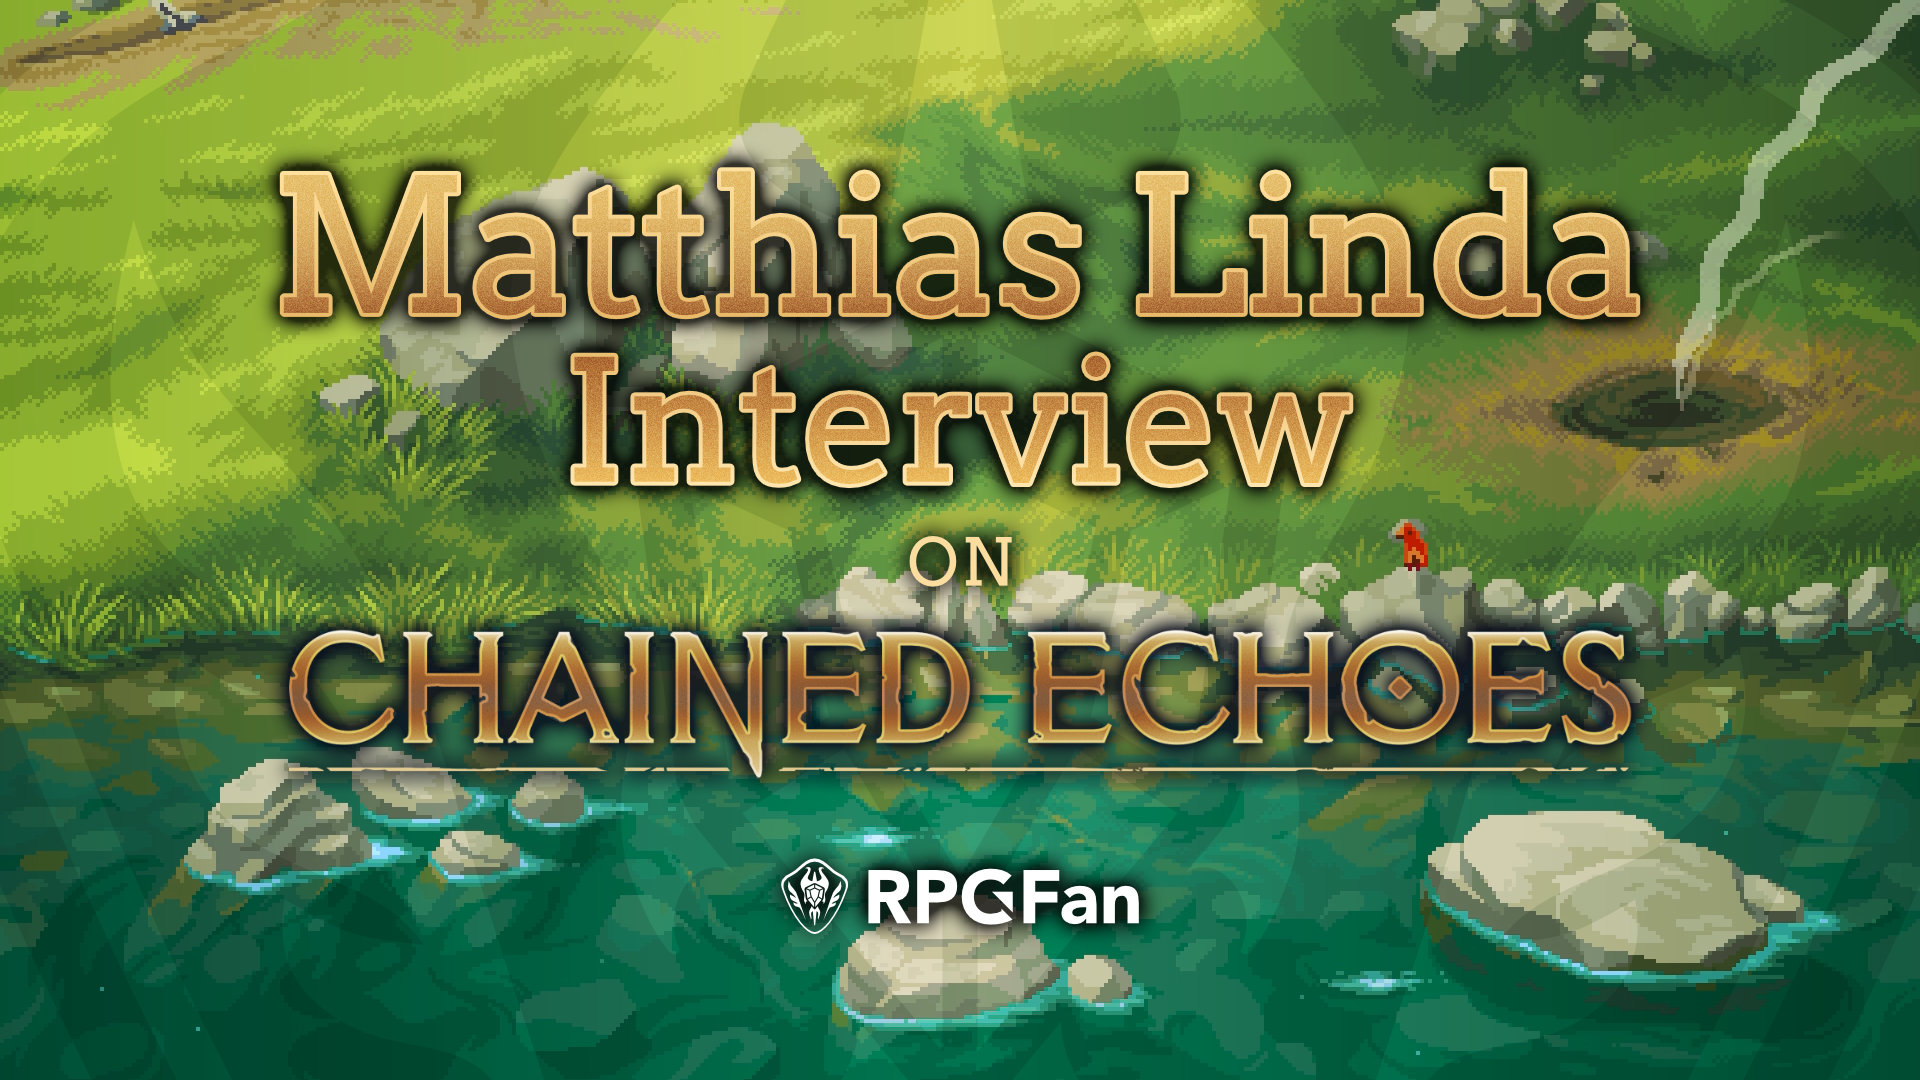 Interview with Matthias Linda on Chained Echoes